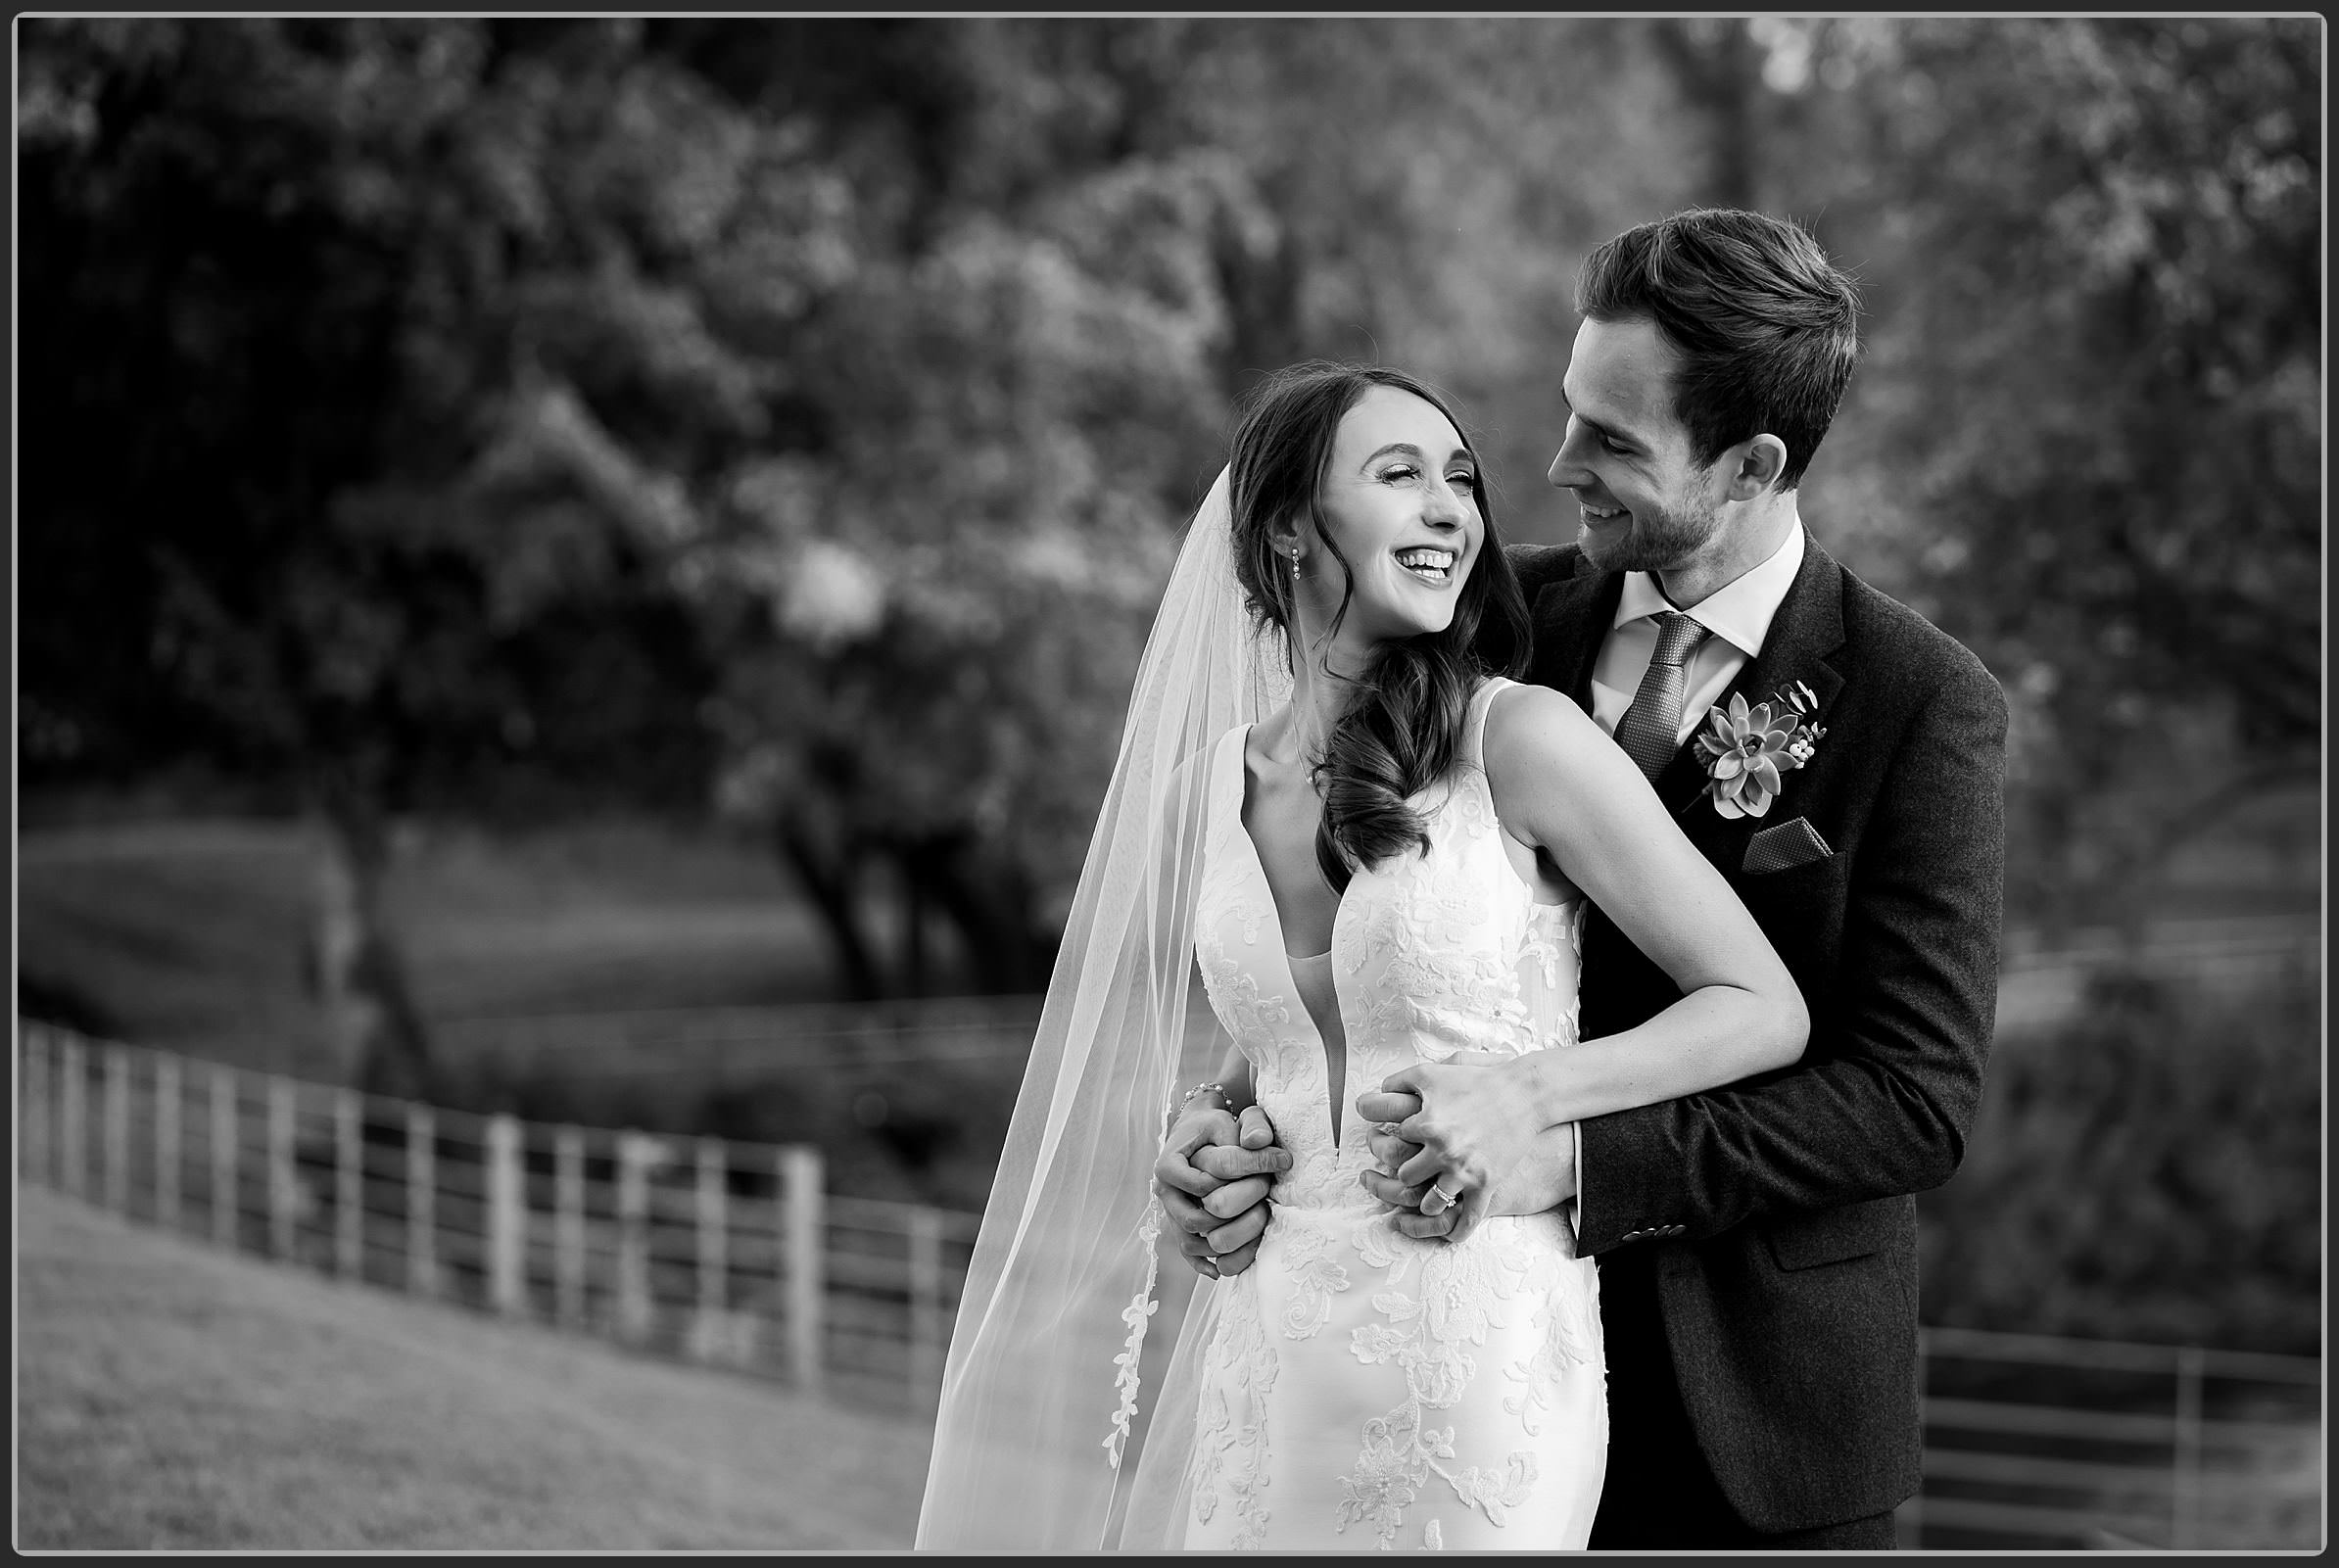 The bride and groom together in black and white